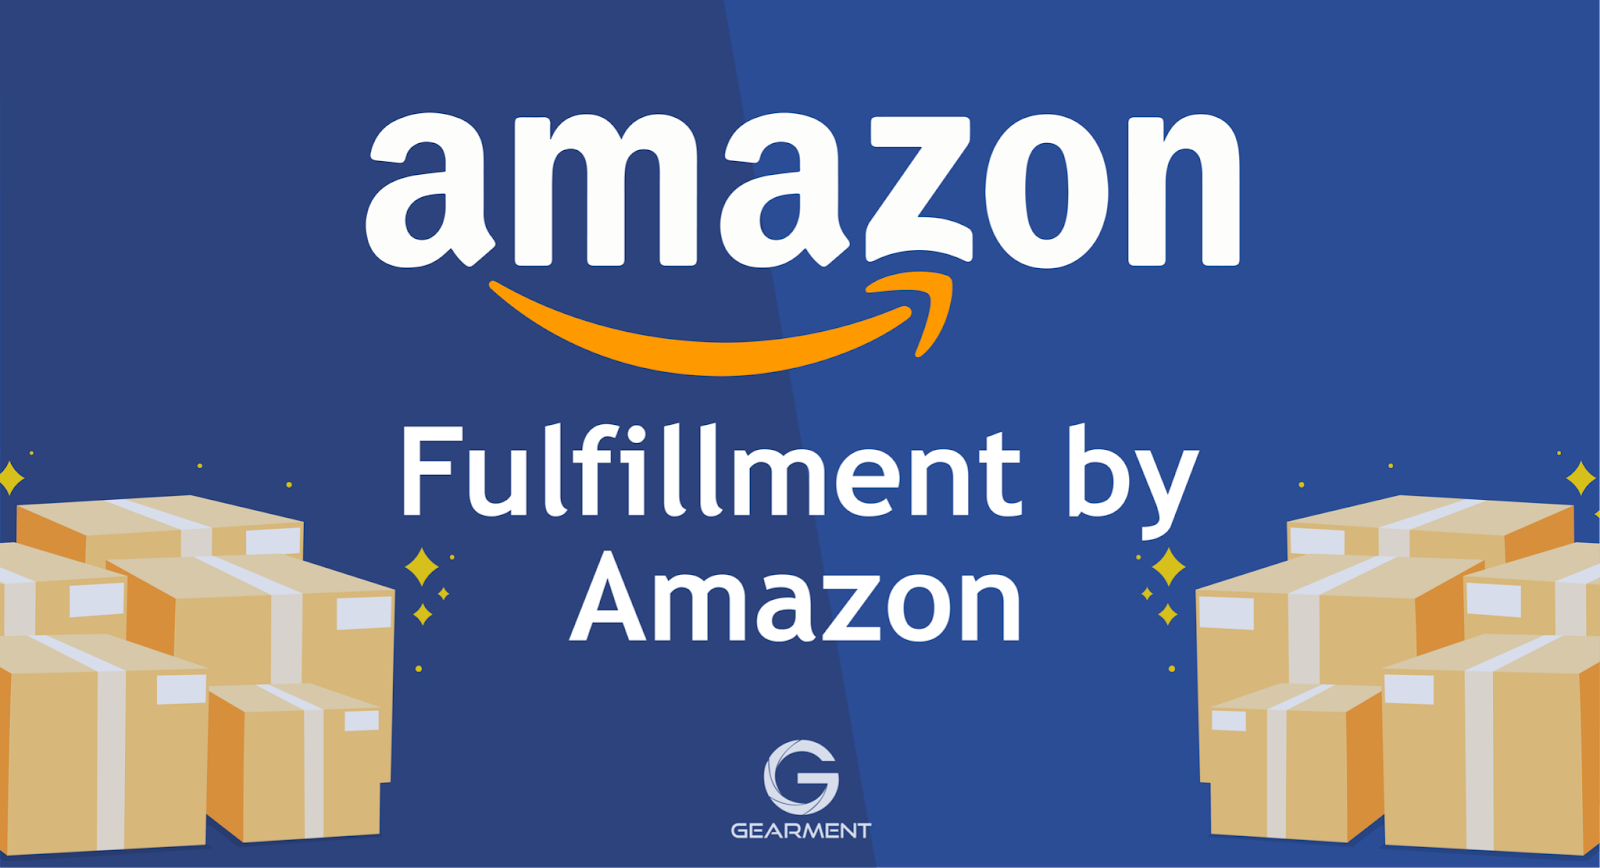 Amazon FBA vs FBM: Which Option Is The Best For You?